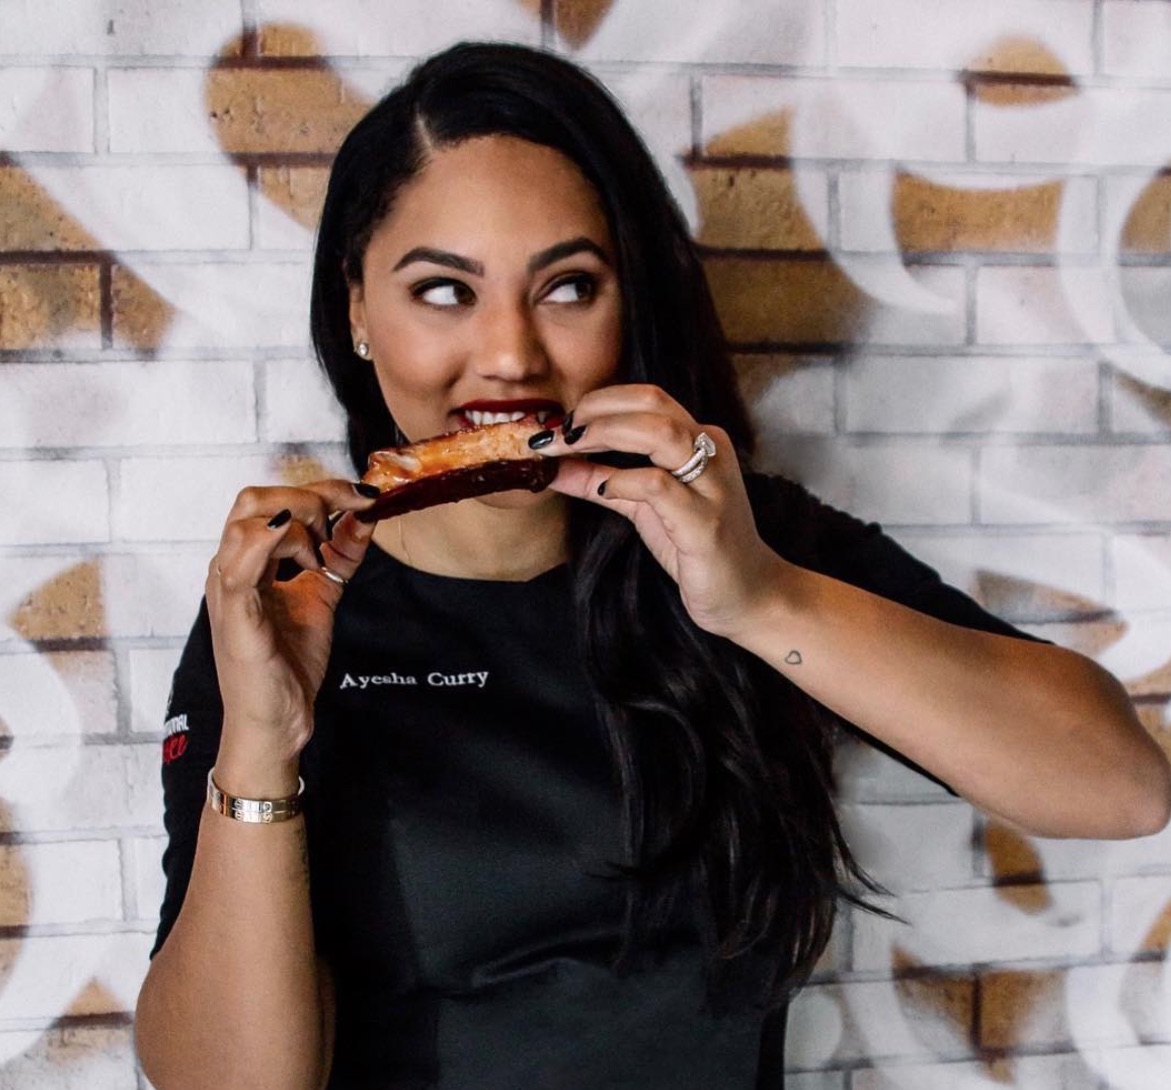 Ayesha Curry’s International Smoke Now Open For Business.